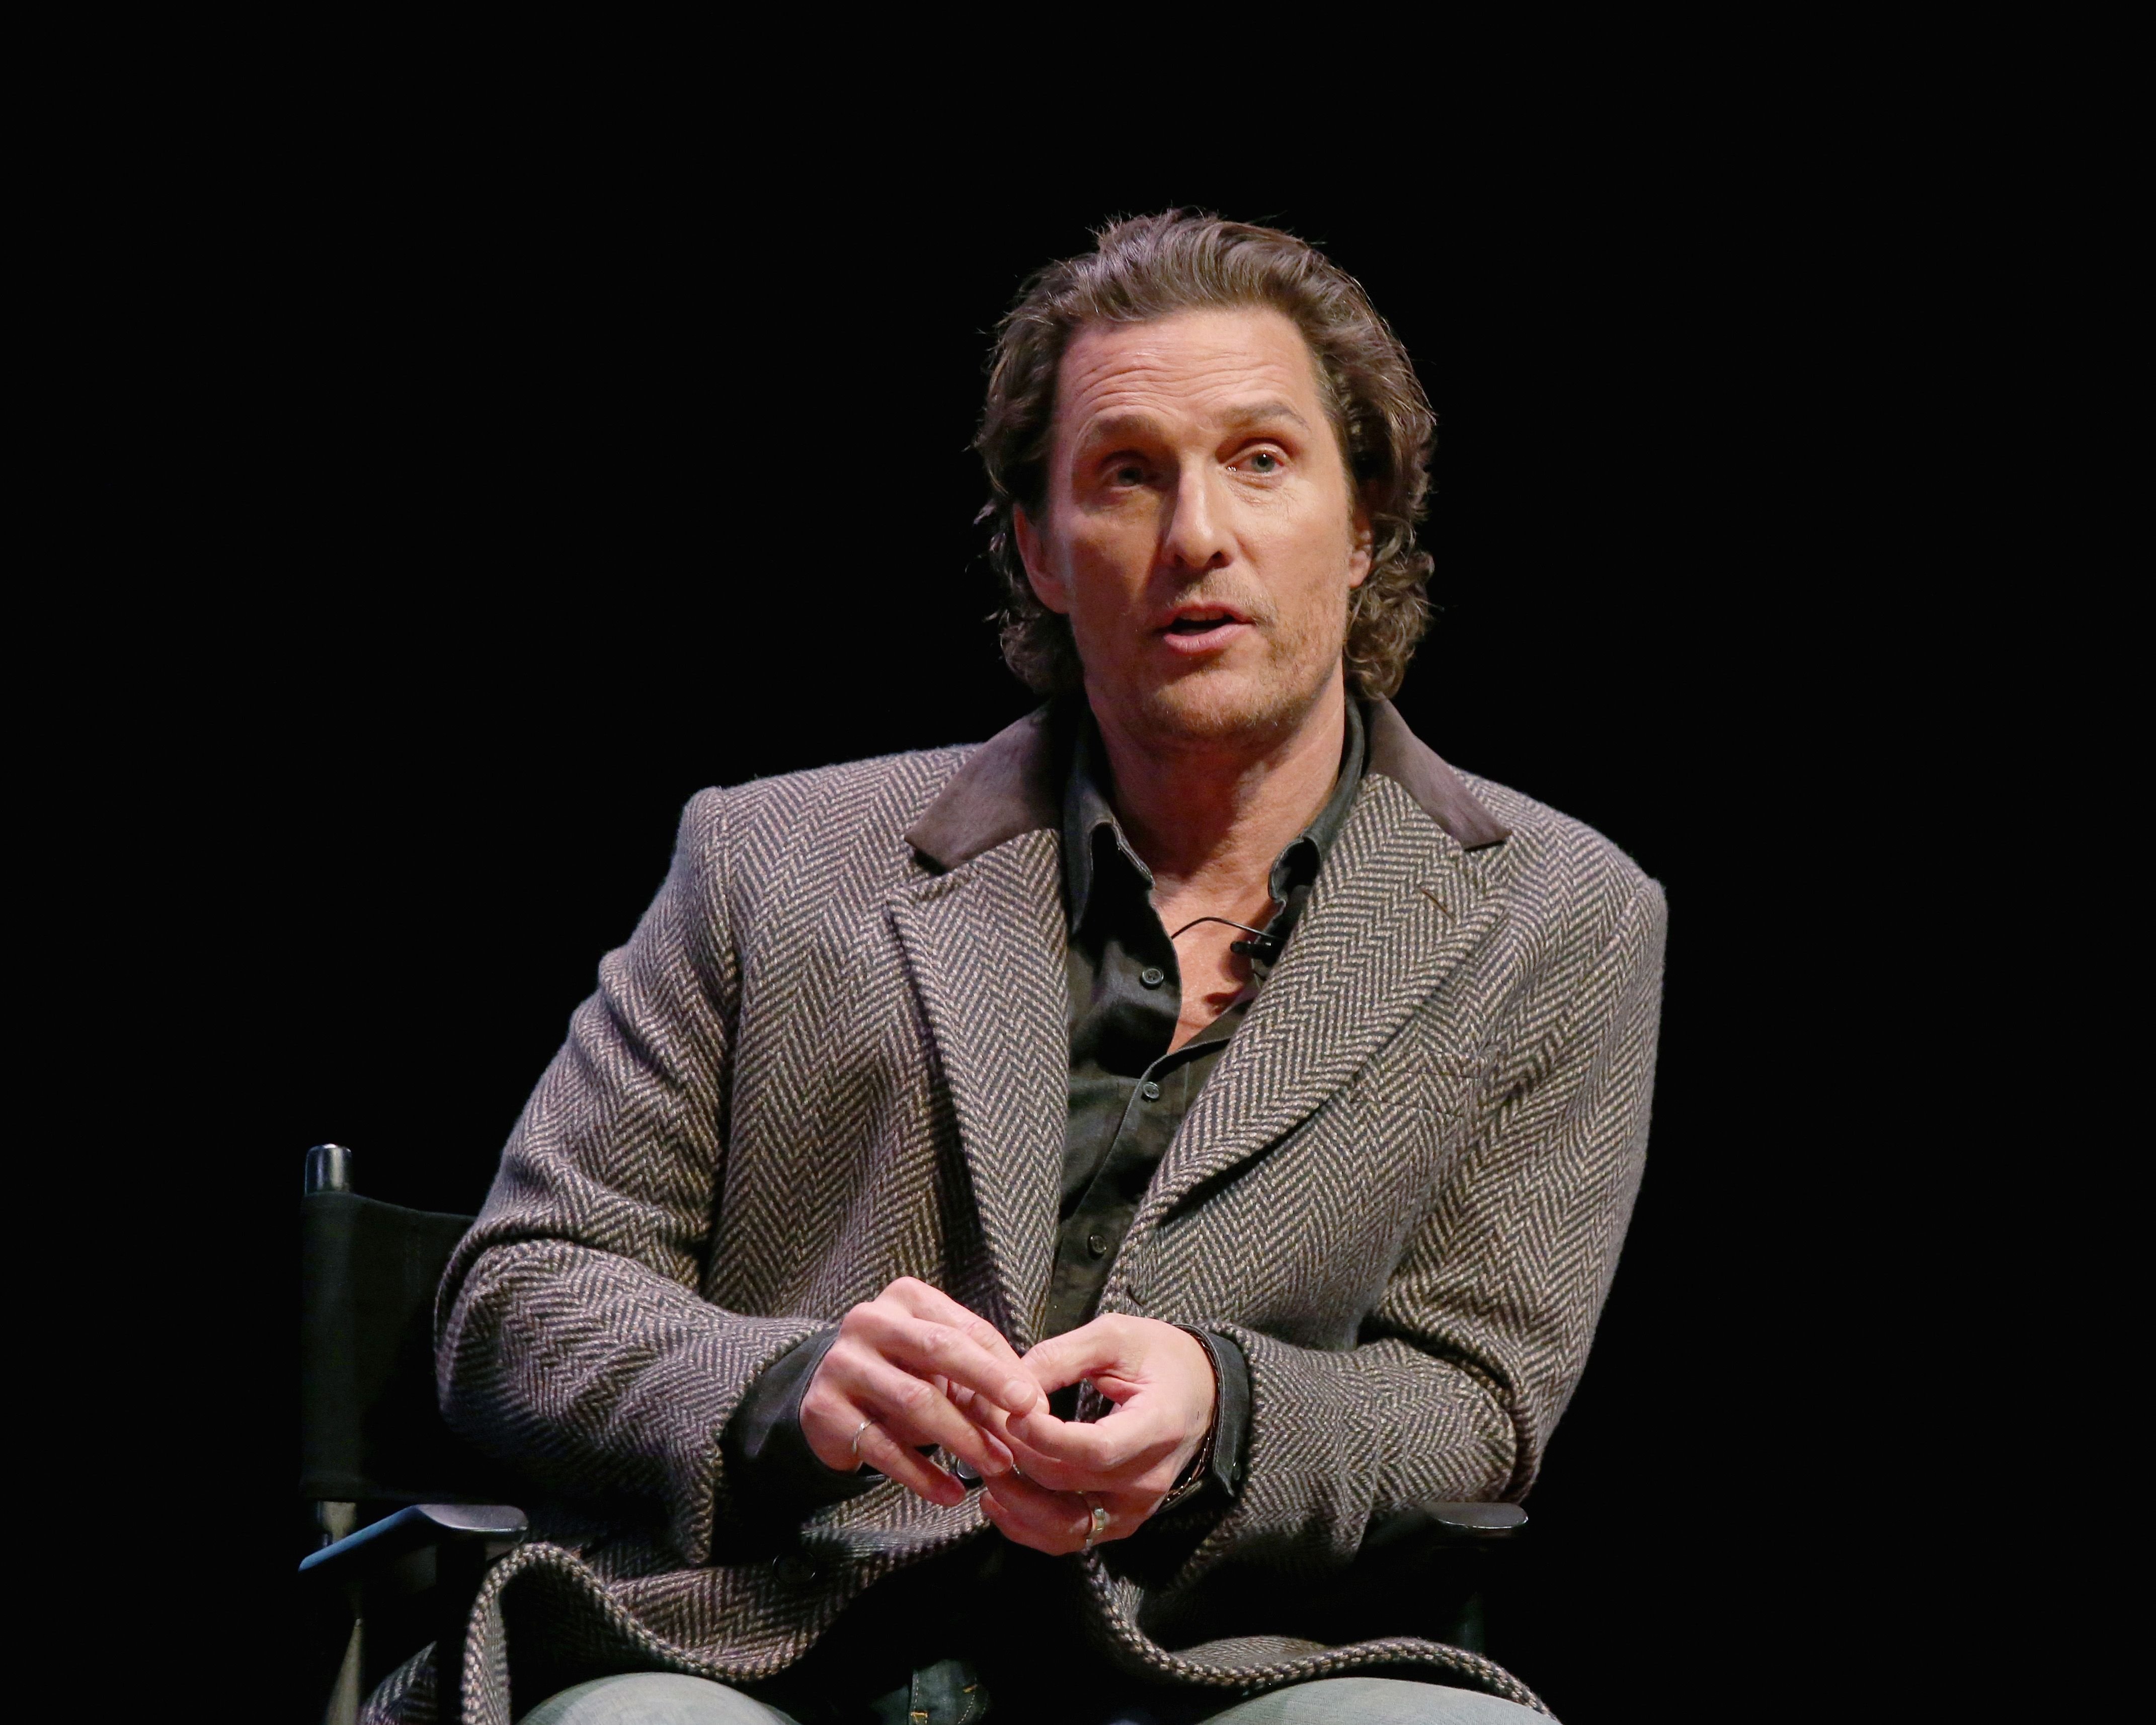 Matthew McConaughey participates in a Q&A after a special screening of his new film "The Gentlemen" at Hogg Memorial Auditorium at The University of Texas at Austin on January 21, 2020 | Photo: Getty Images